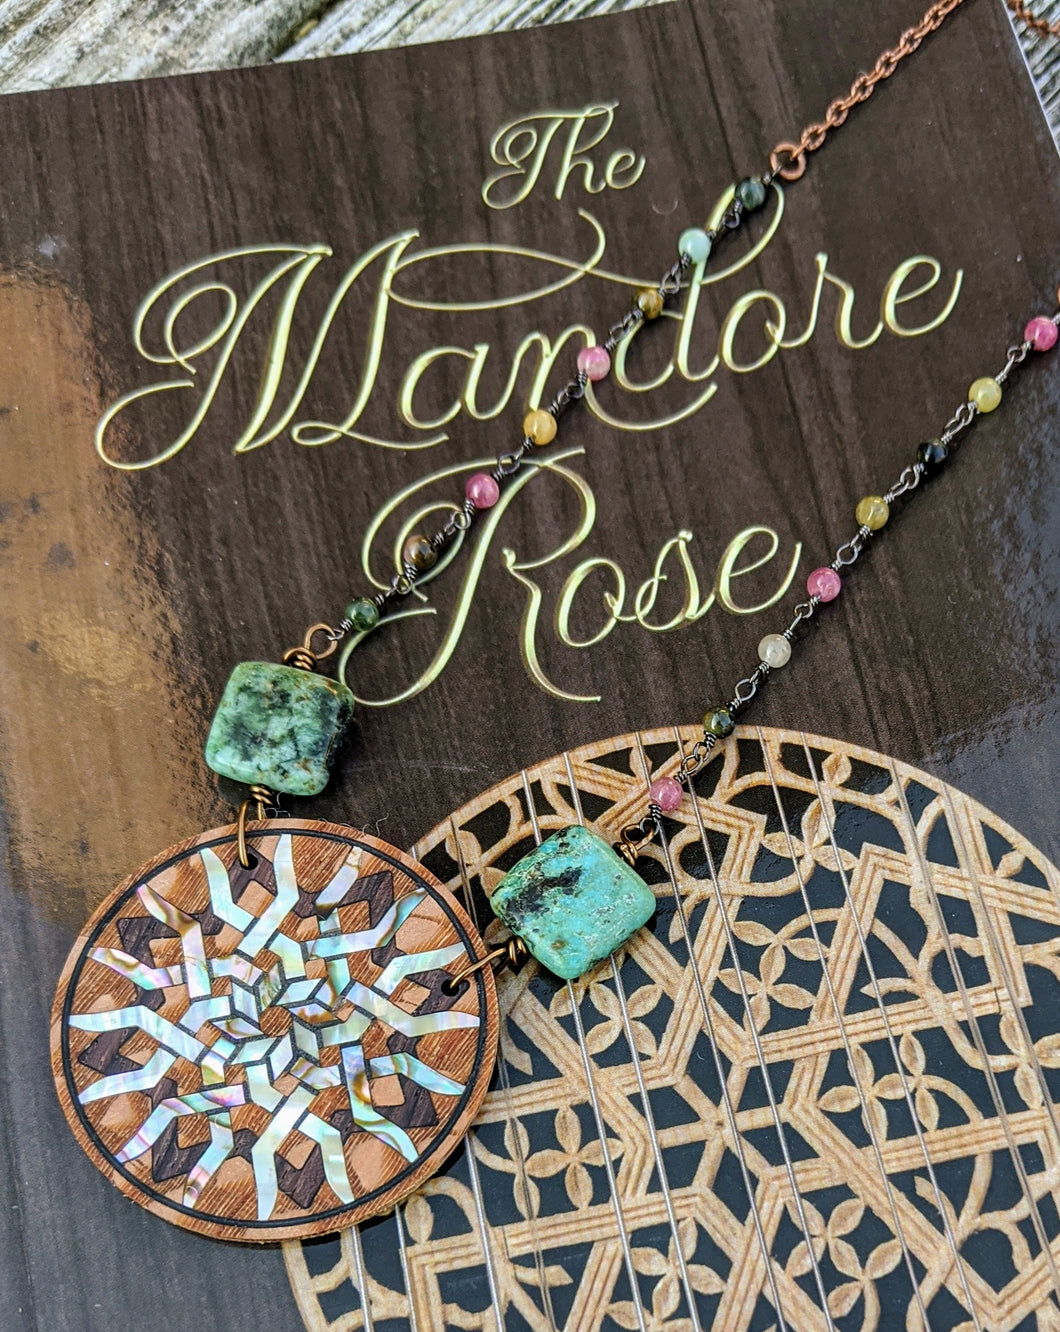 Limited Release - Mandore Rose Necklace and Signed Novel Set - 8 - Minxes' Trinkets